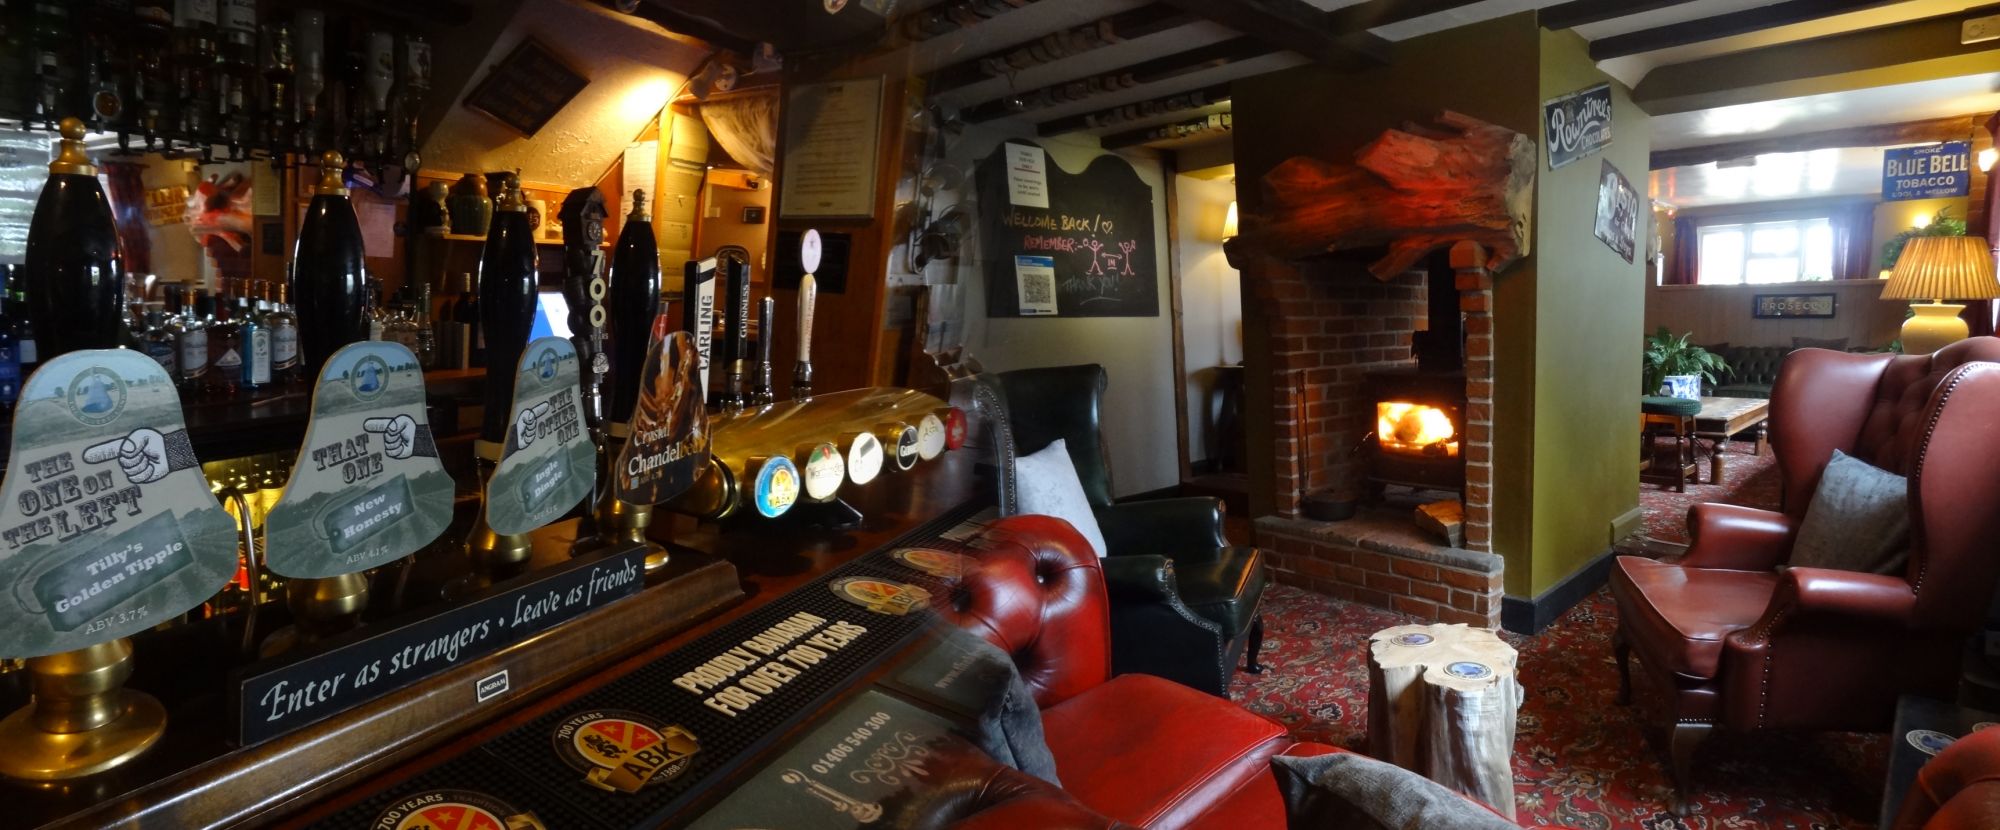 Welcome to The Bluebell Inn